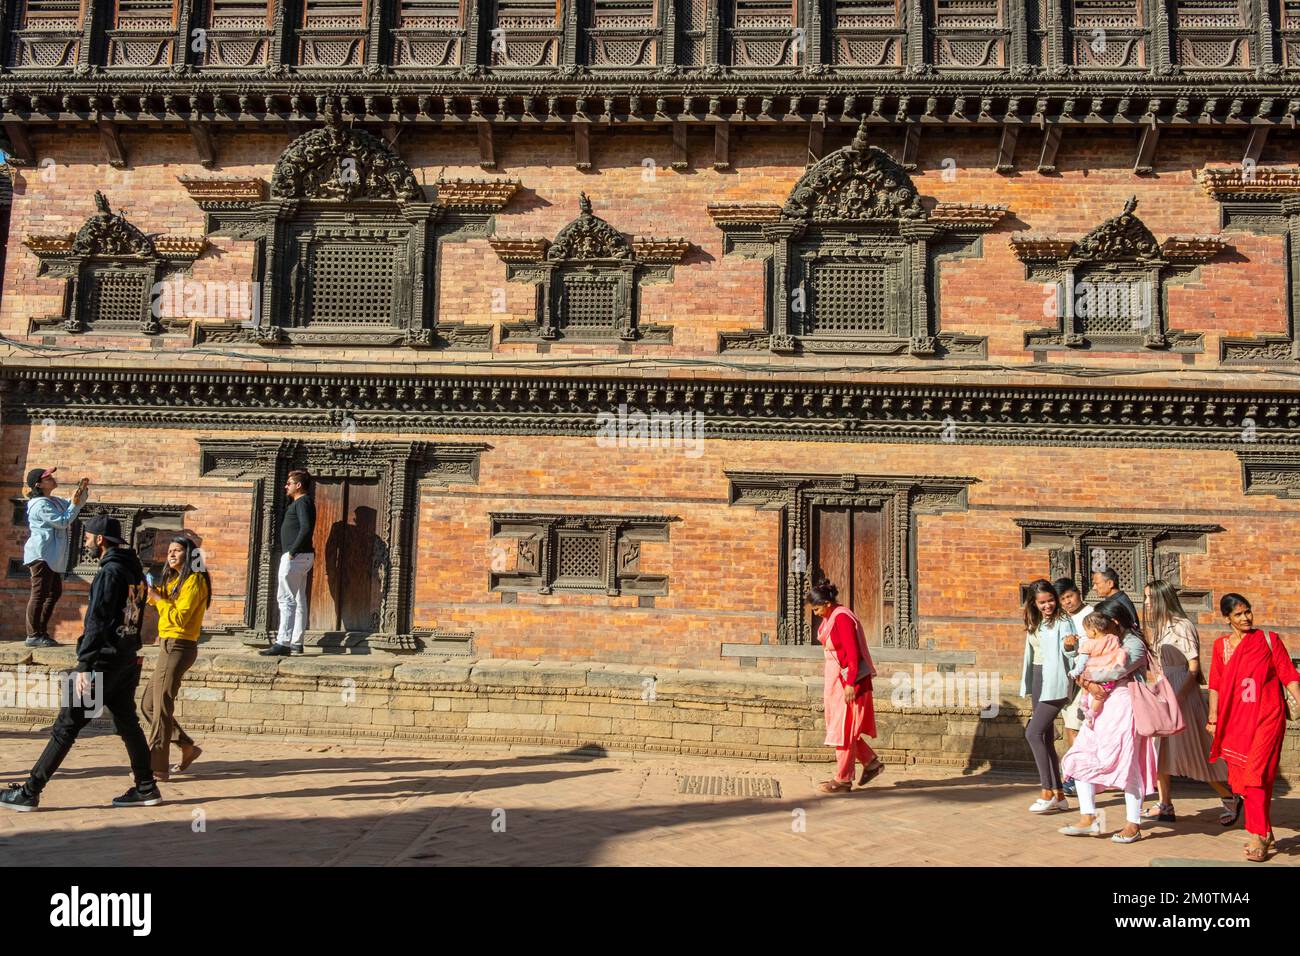 Nepal Kathmandu Valley Listed As World Heritage By Unesco Bhaktapur Durbar Square The